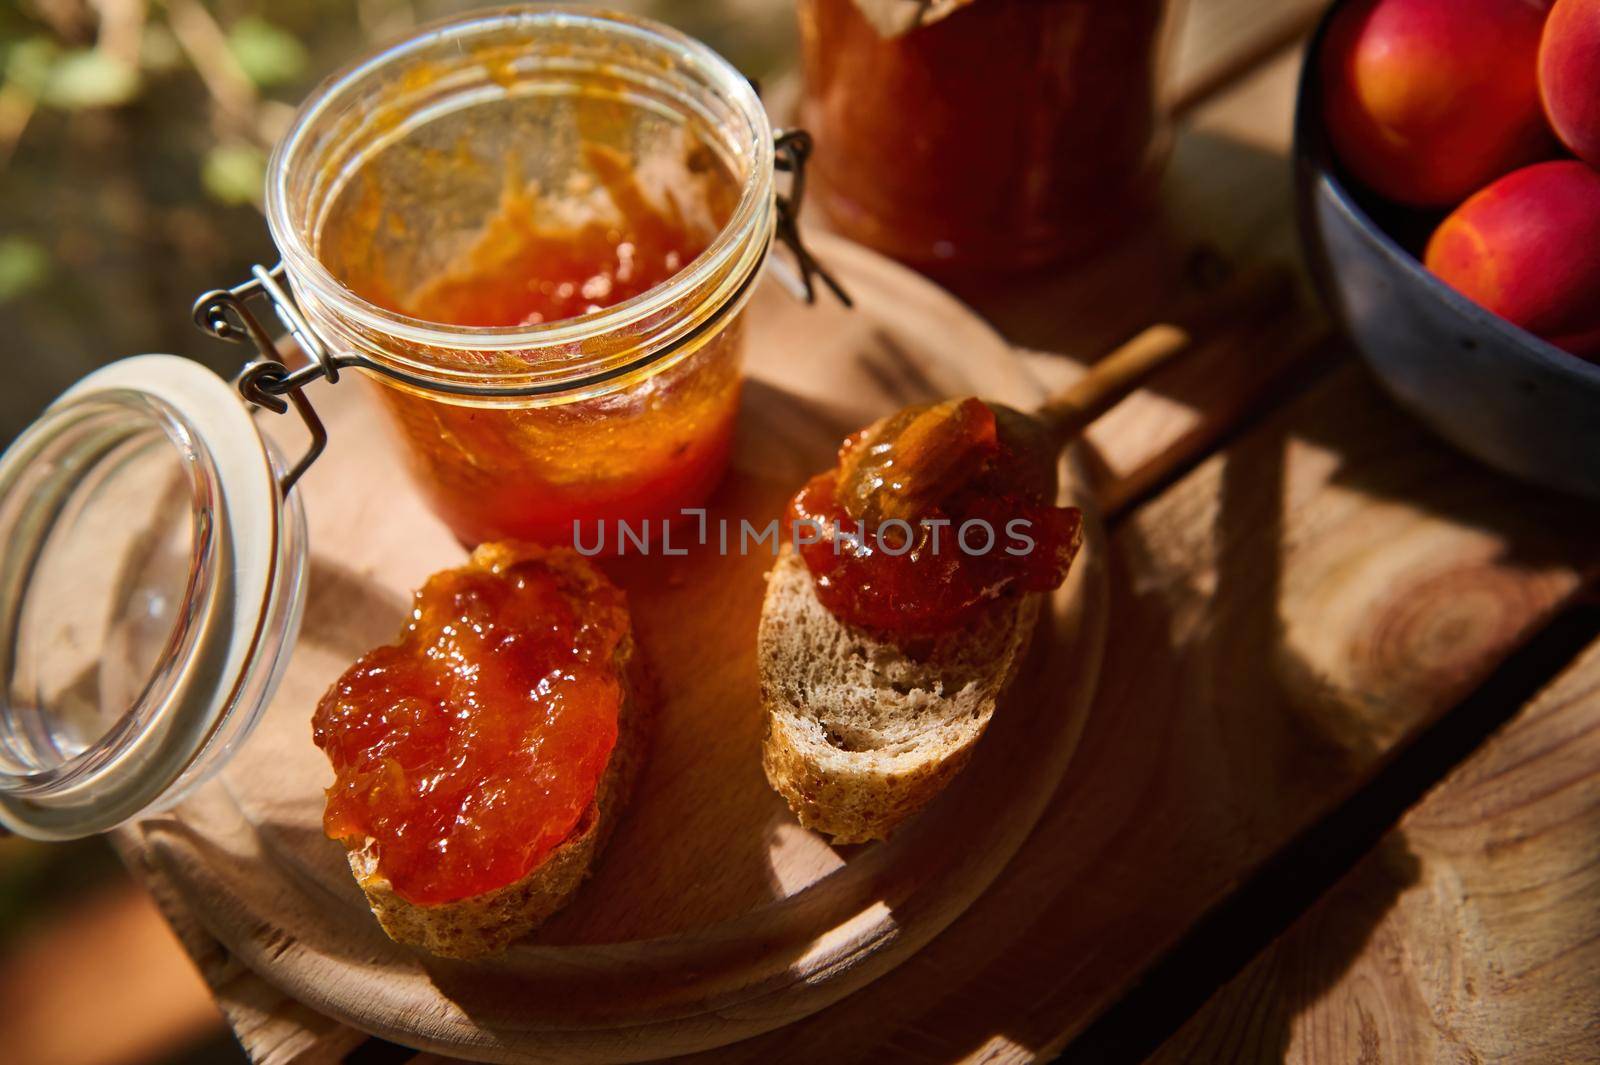 Top view of a homemade jam, slices of whole grain bread on a wooden board and partial view of ripe sweet apricots in a blue ceramic bowl, on a wooden crate. Canned food, sweet dessert. Still life